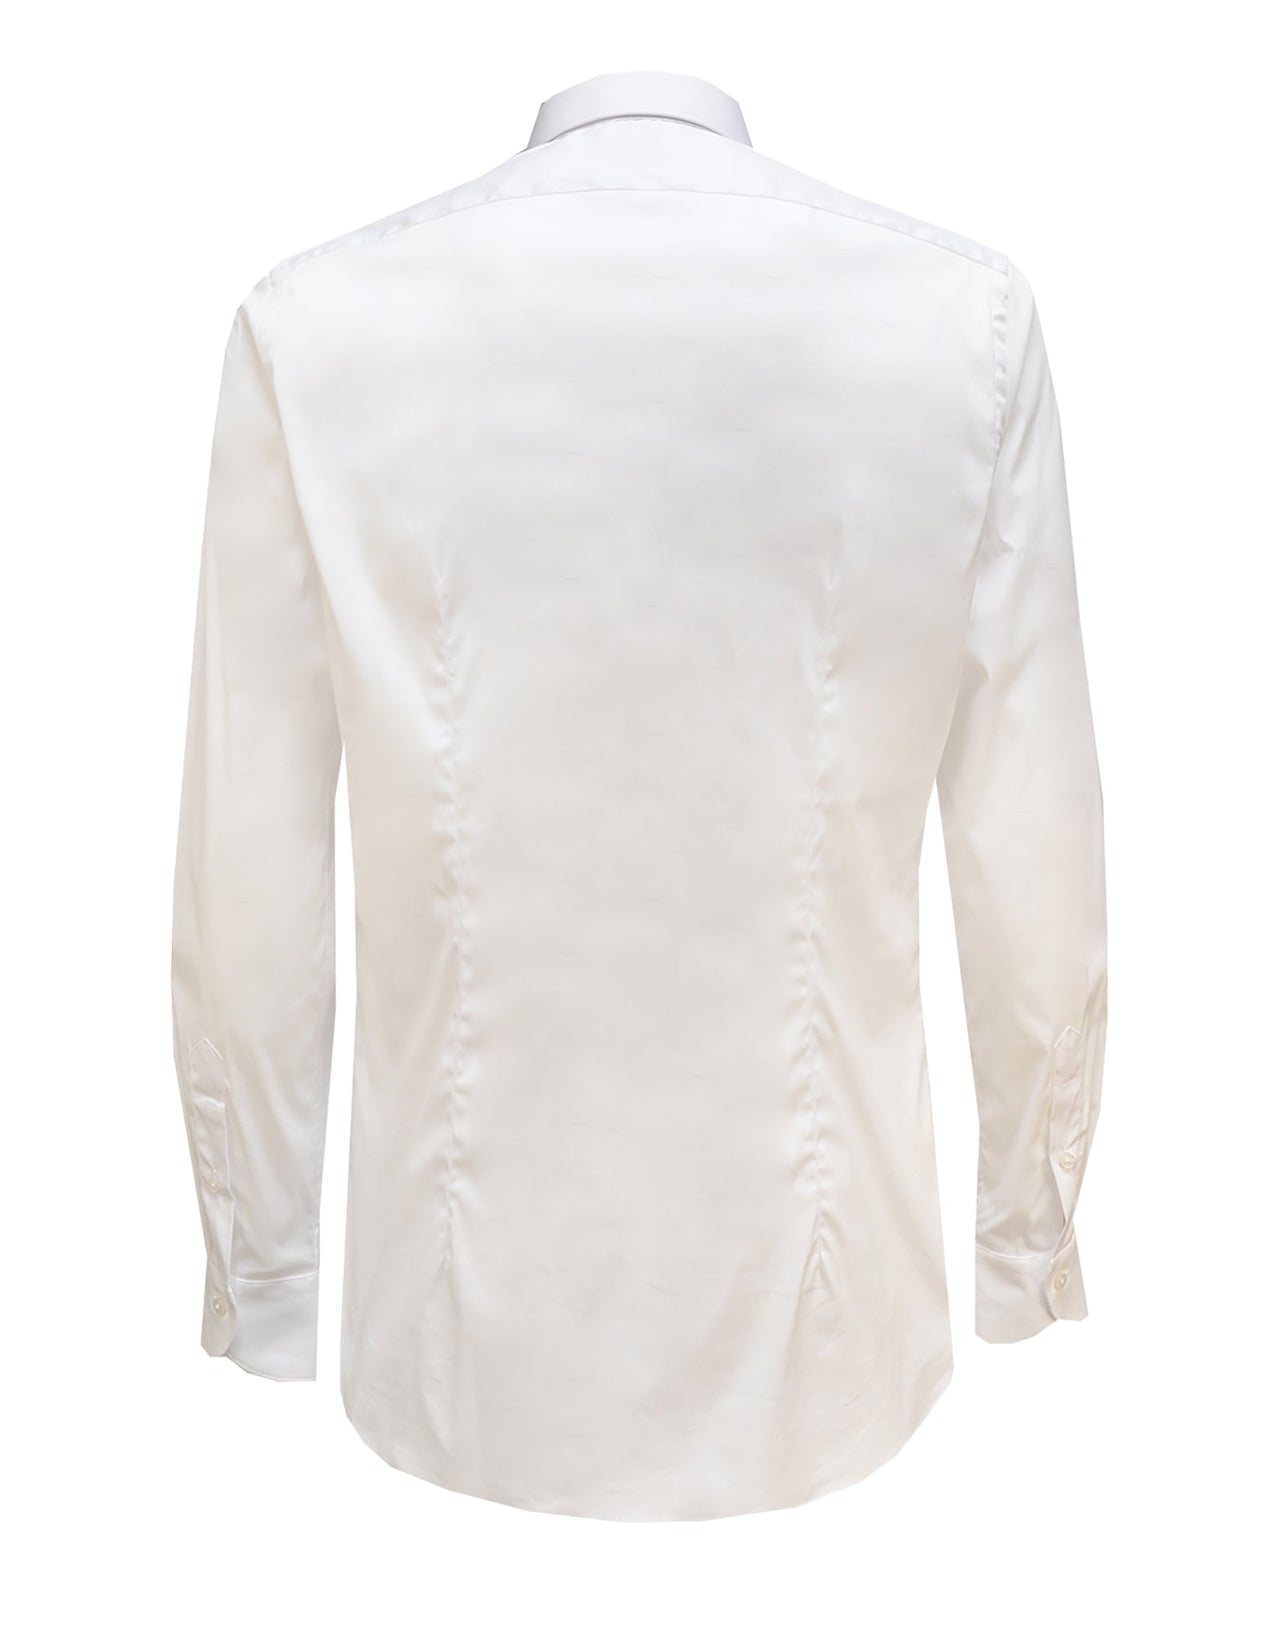 Xacus white shirt in popeline tailor stretch